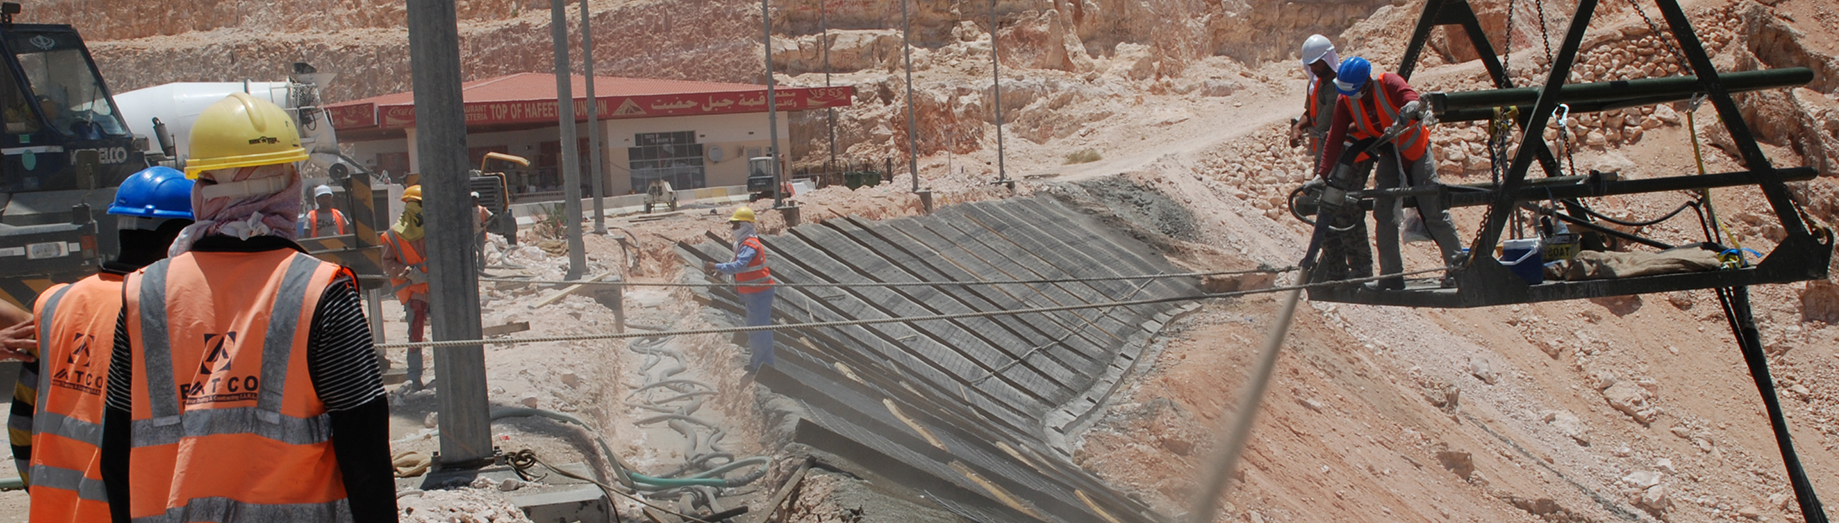 Protection & Stabilization of Rock Cut & Fill Areas of Jabel Hafeet